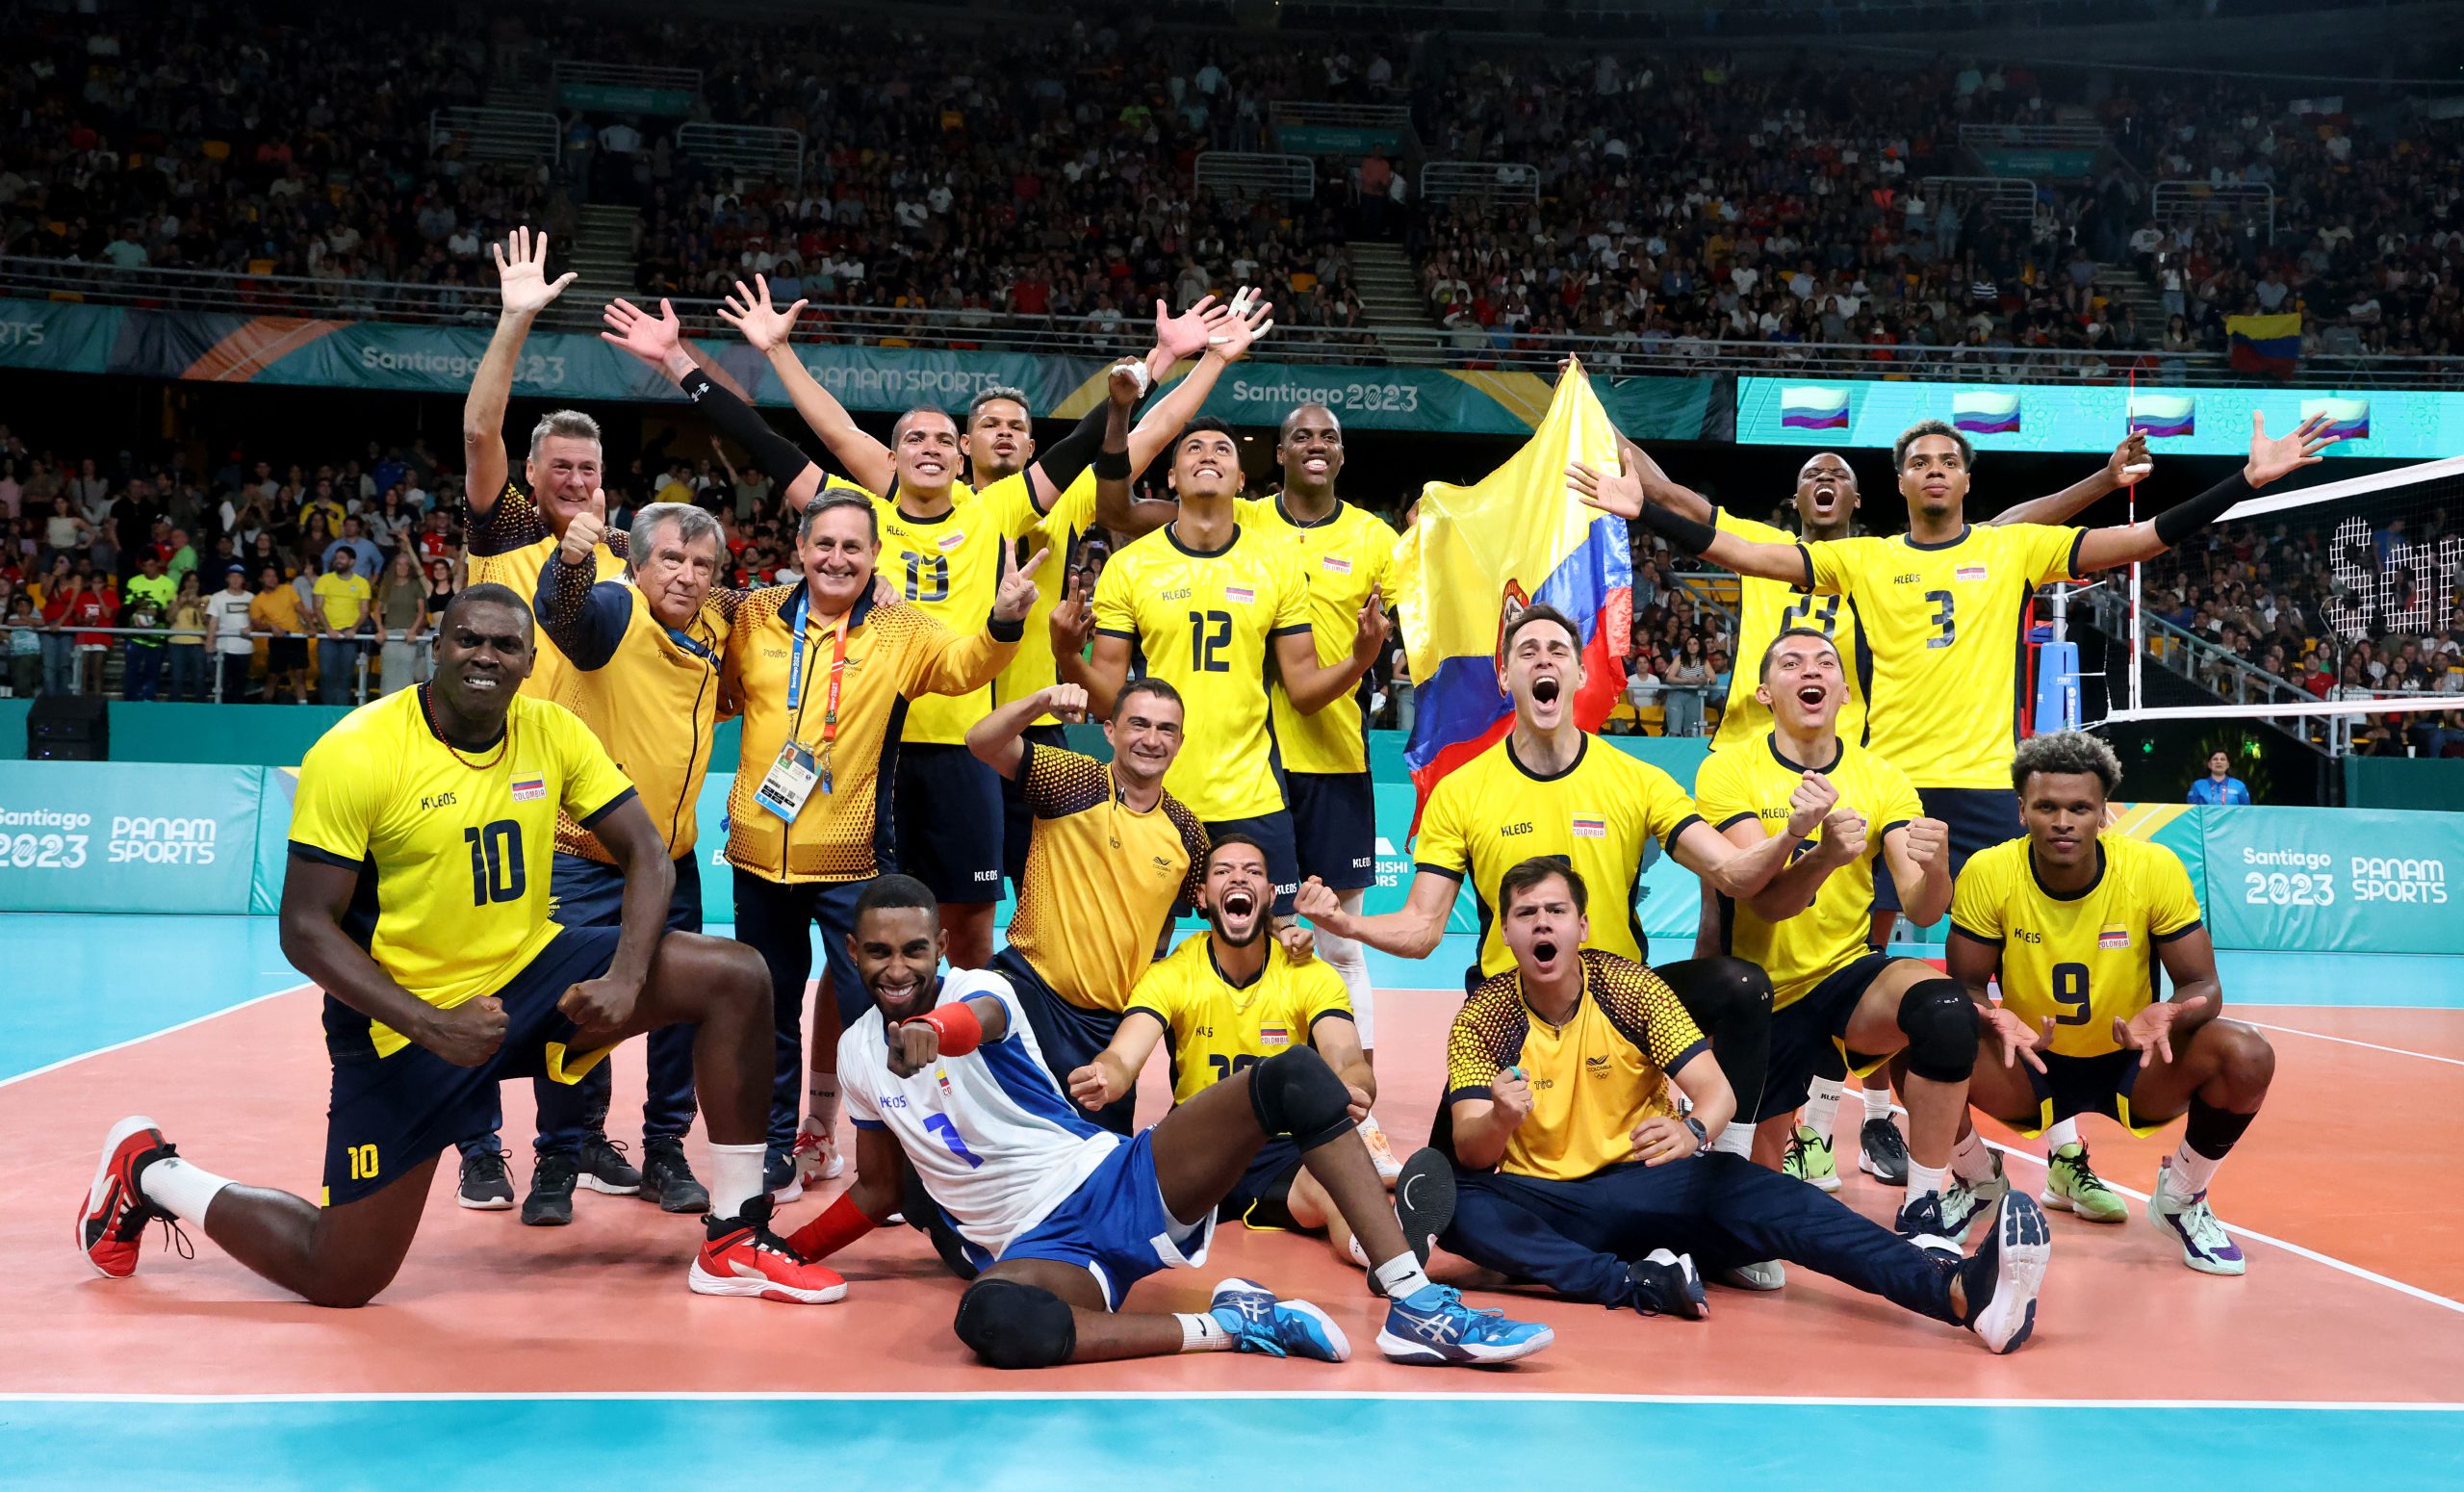 Historic Bronze Medal for Colombia, first ever at Pan American Games